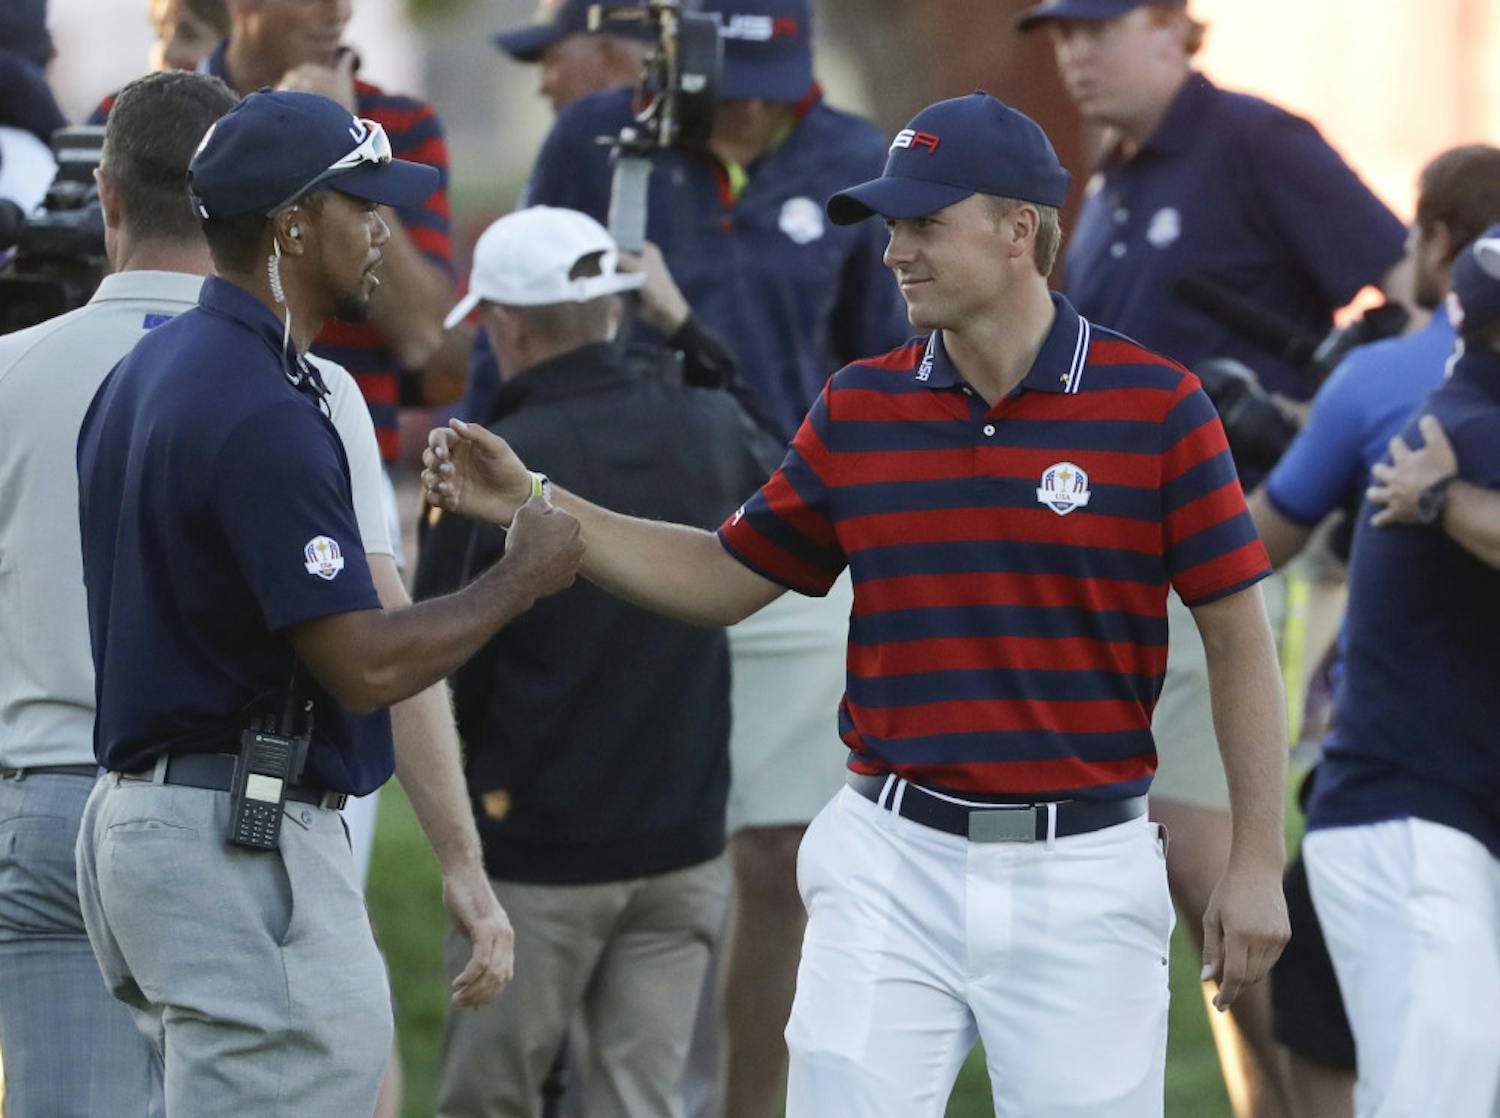 United States vice-captain Tiger Woods congratulates United States’ Jordan Spieth after a four-ball match at the Ryder Cup golf tournament Saturday, Oct. 1, 2016, at Hazeltine National Golf Club in Chaska, Minn. (AP Photo/Chris Carlson)